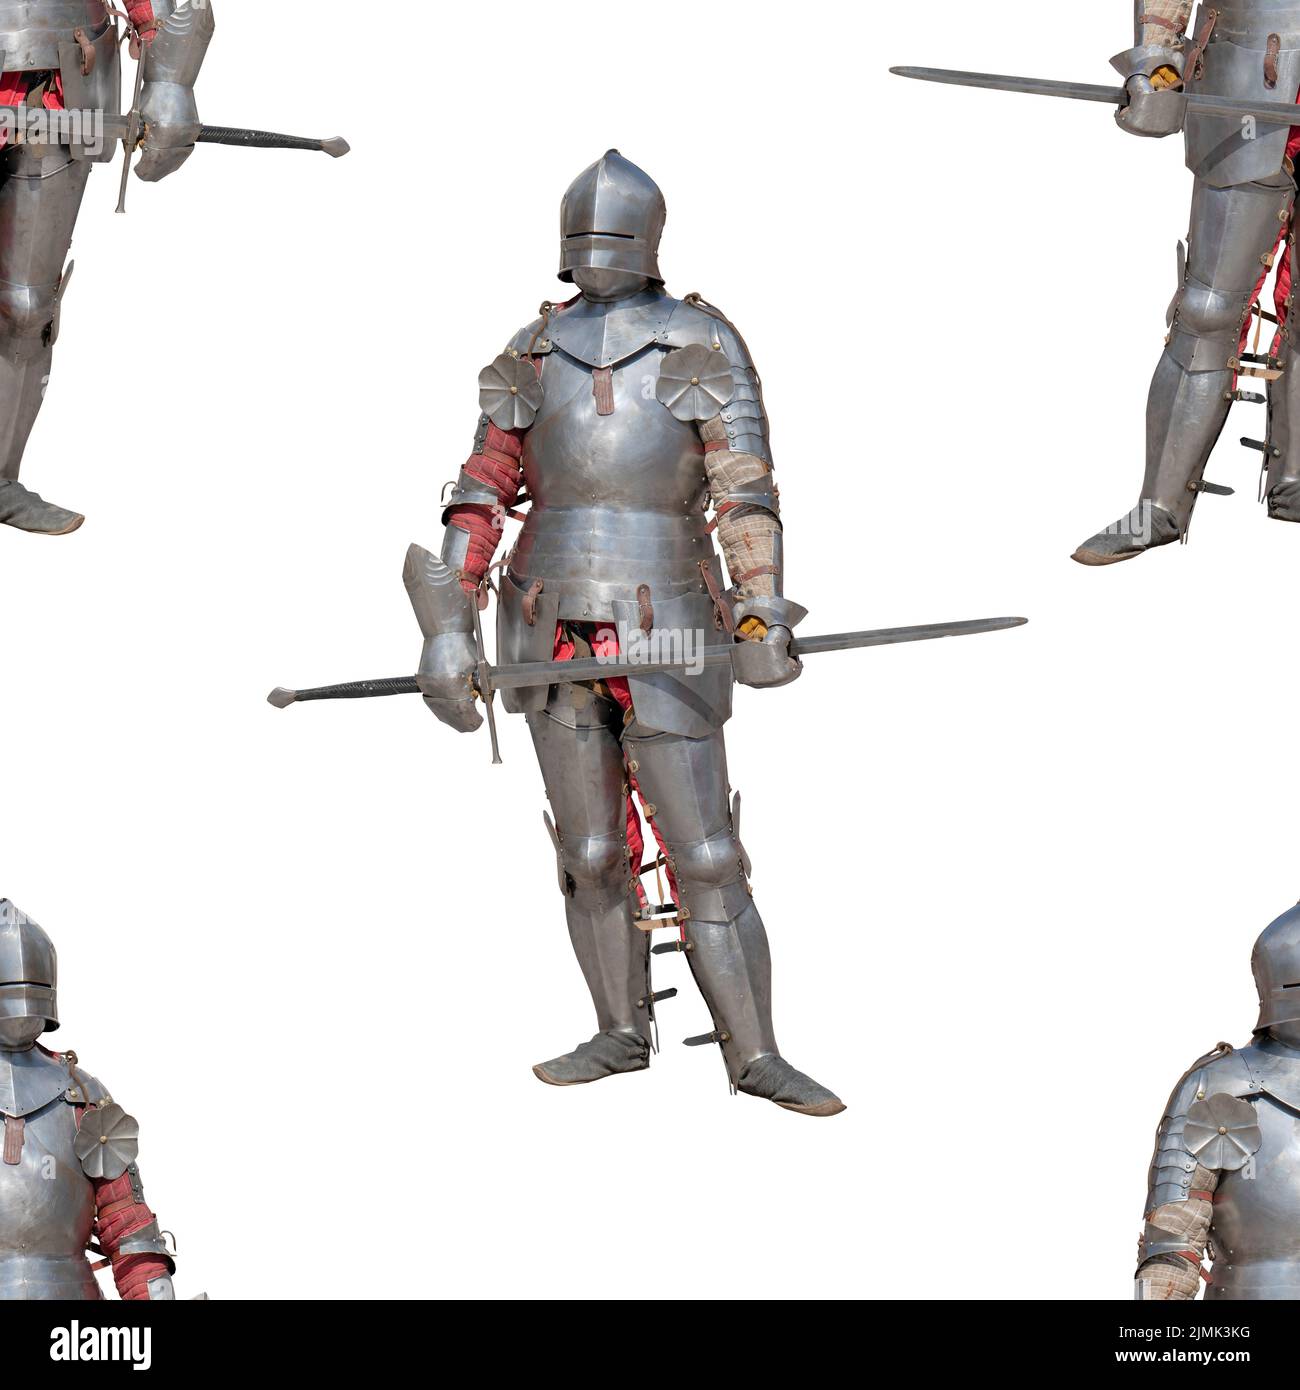 Knight in shiny metal armor on a white background. Seamless pattern. Stock Photo